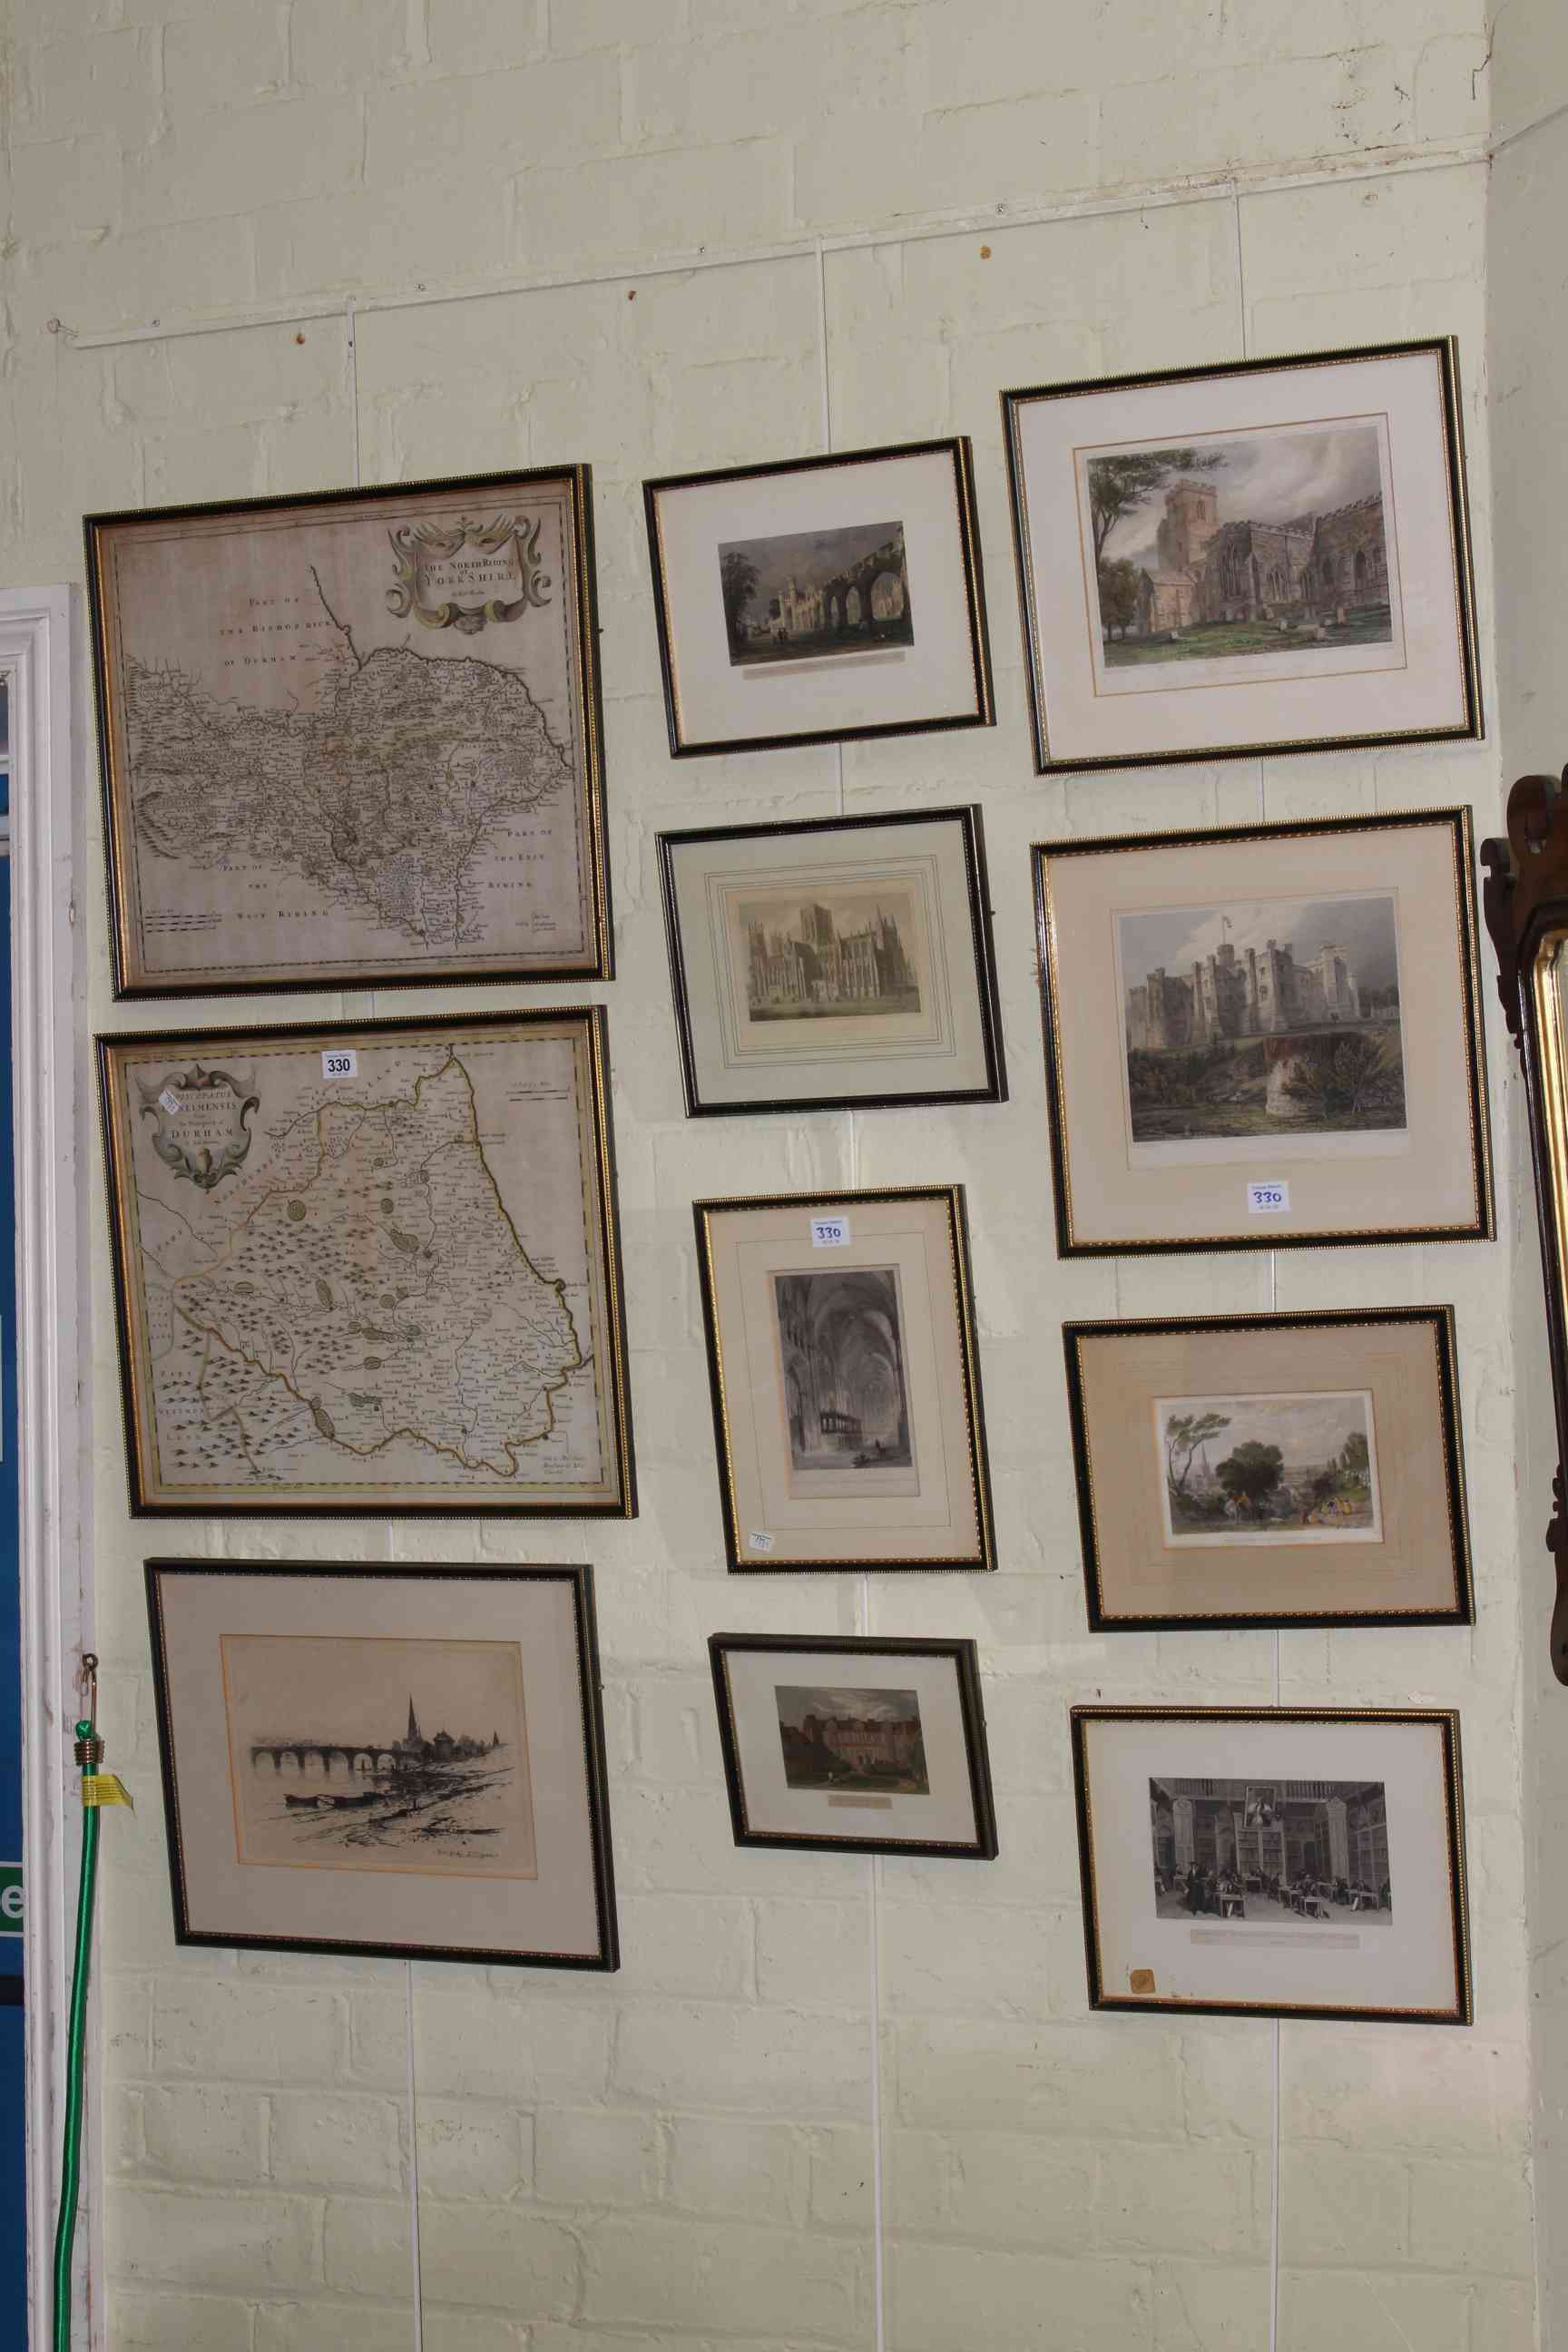 Two Robert Morden map prints, Durham and Yorkshire and collection of nine framed etchings.